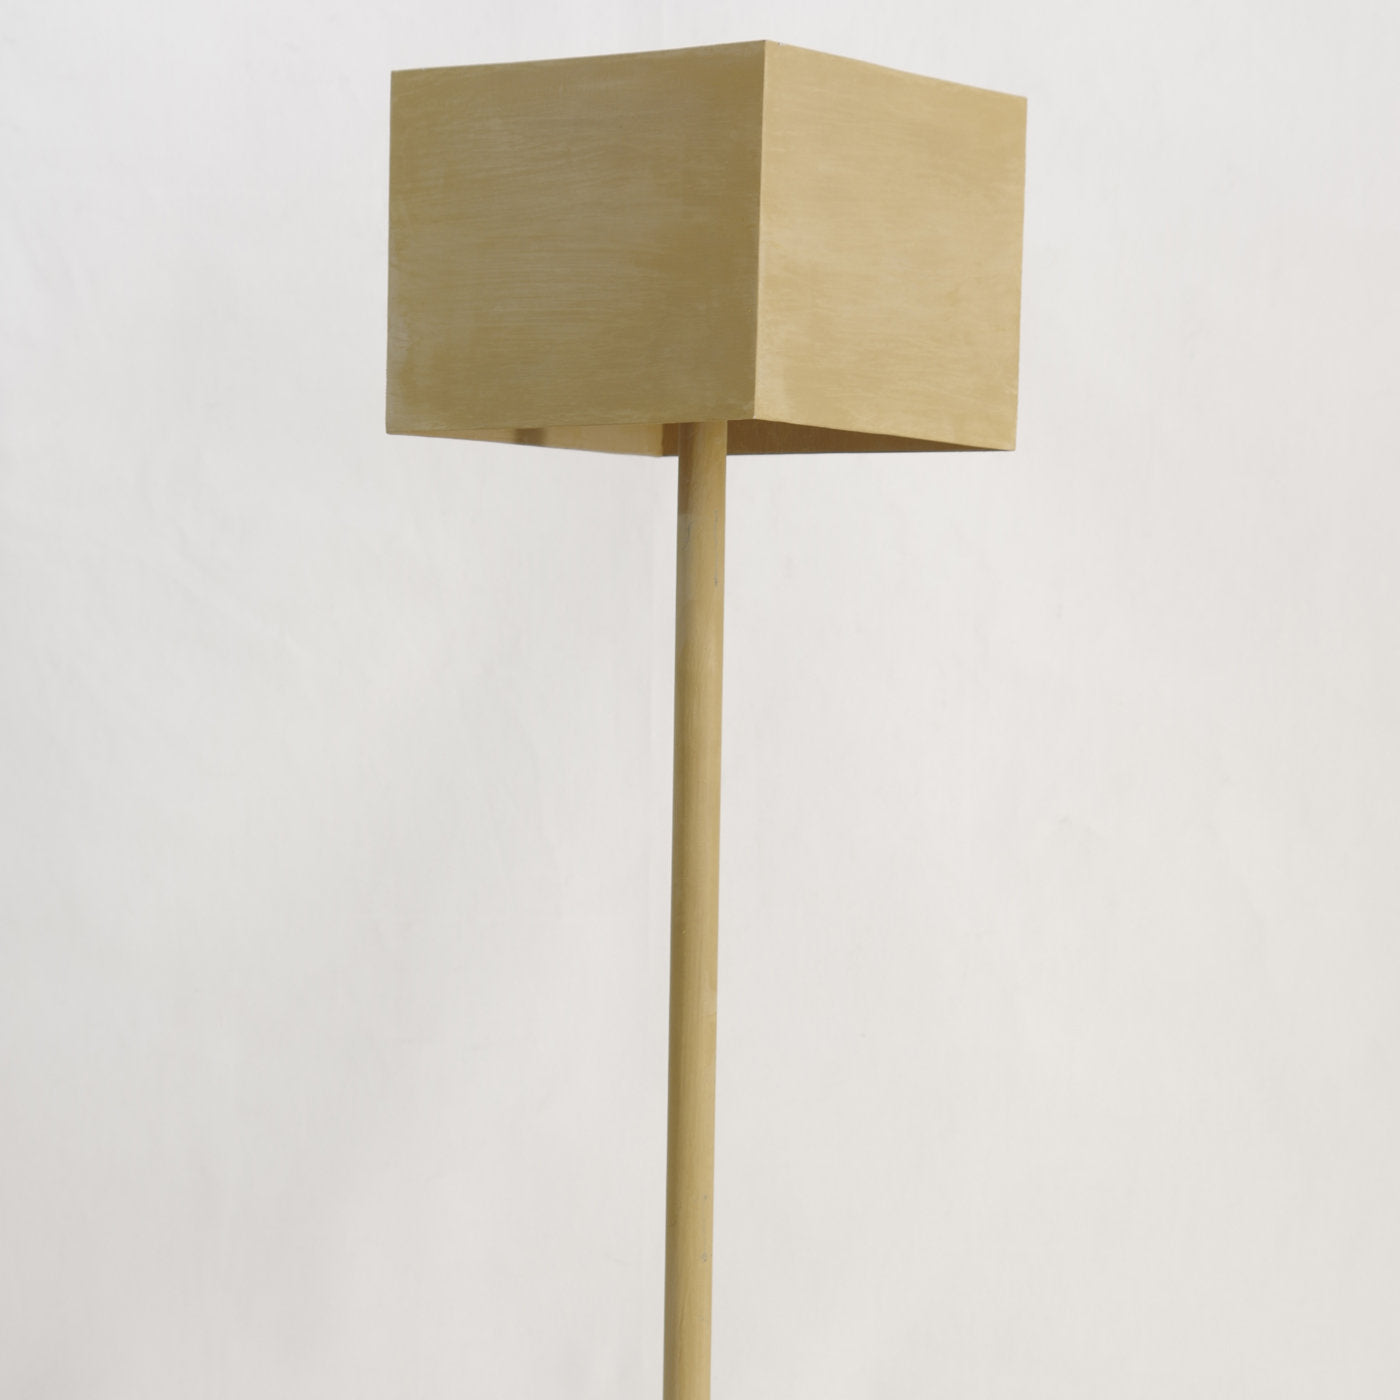 Ratio 1 Tall Table Lamp - Alternative view 1